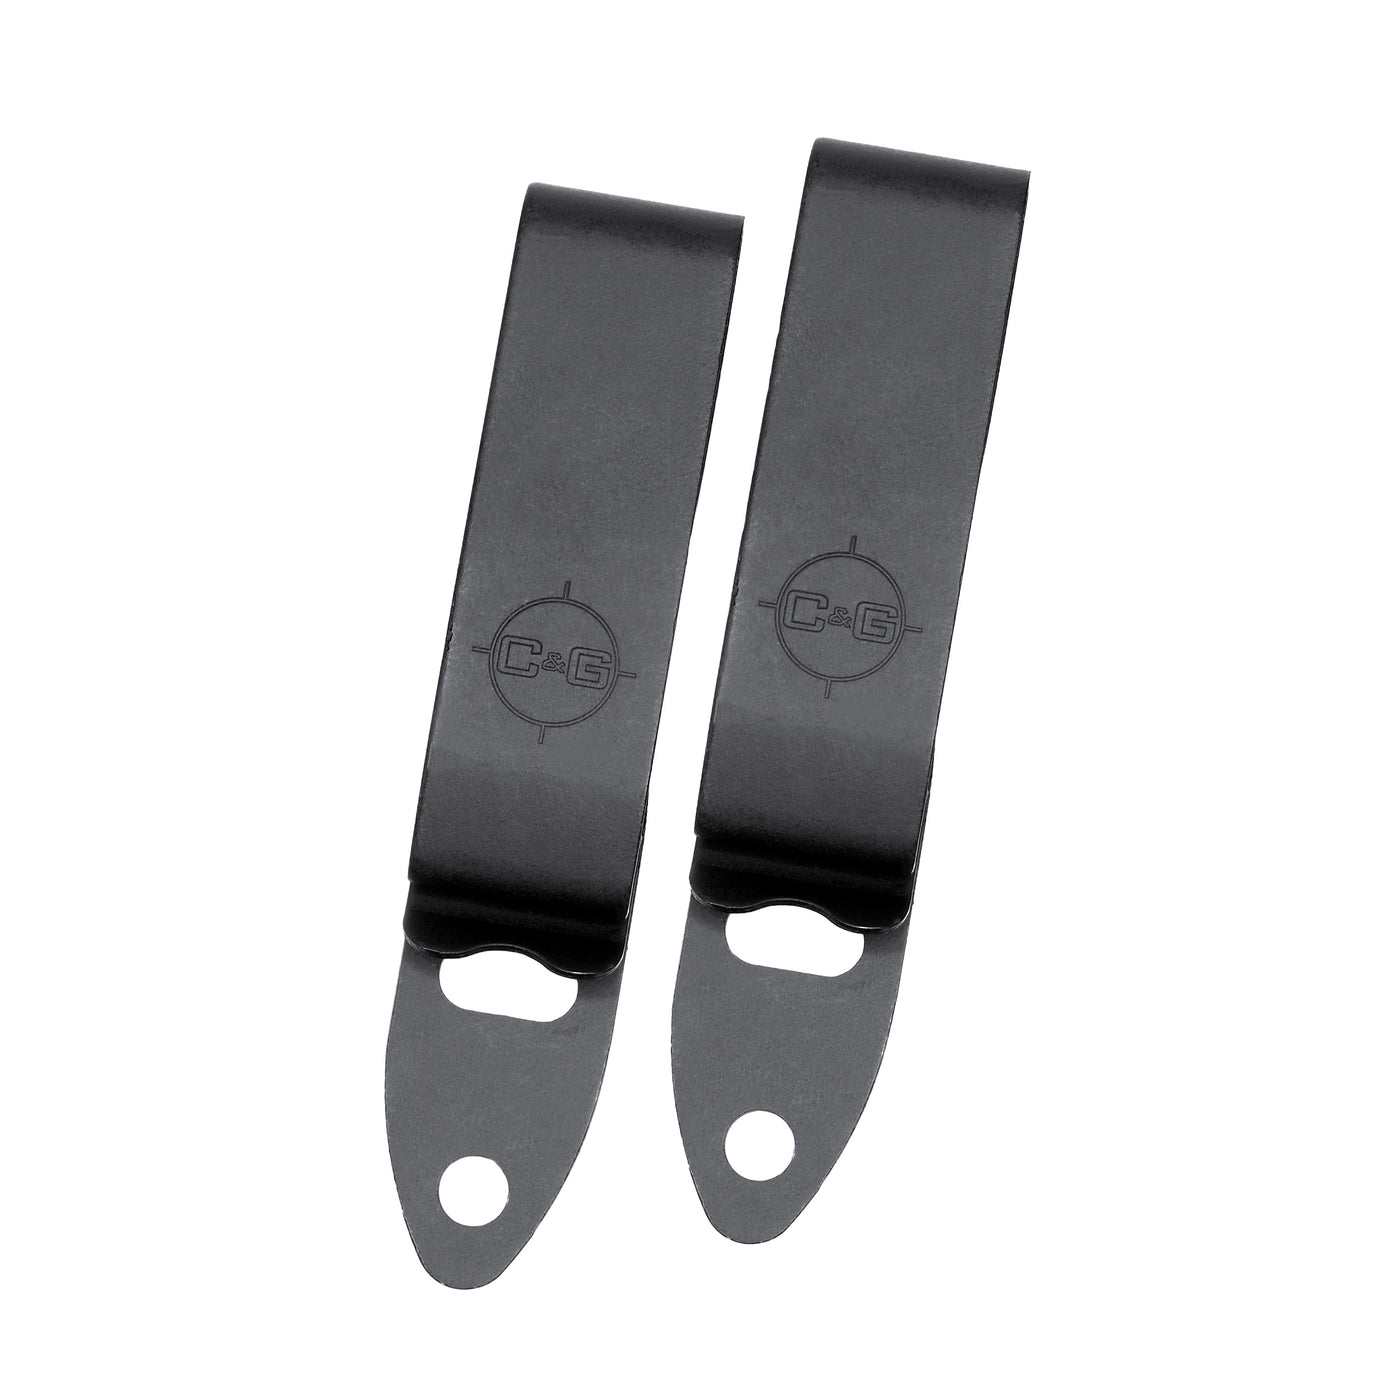 C&G Holsters 1.75” CNG Belt Clips front view